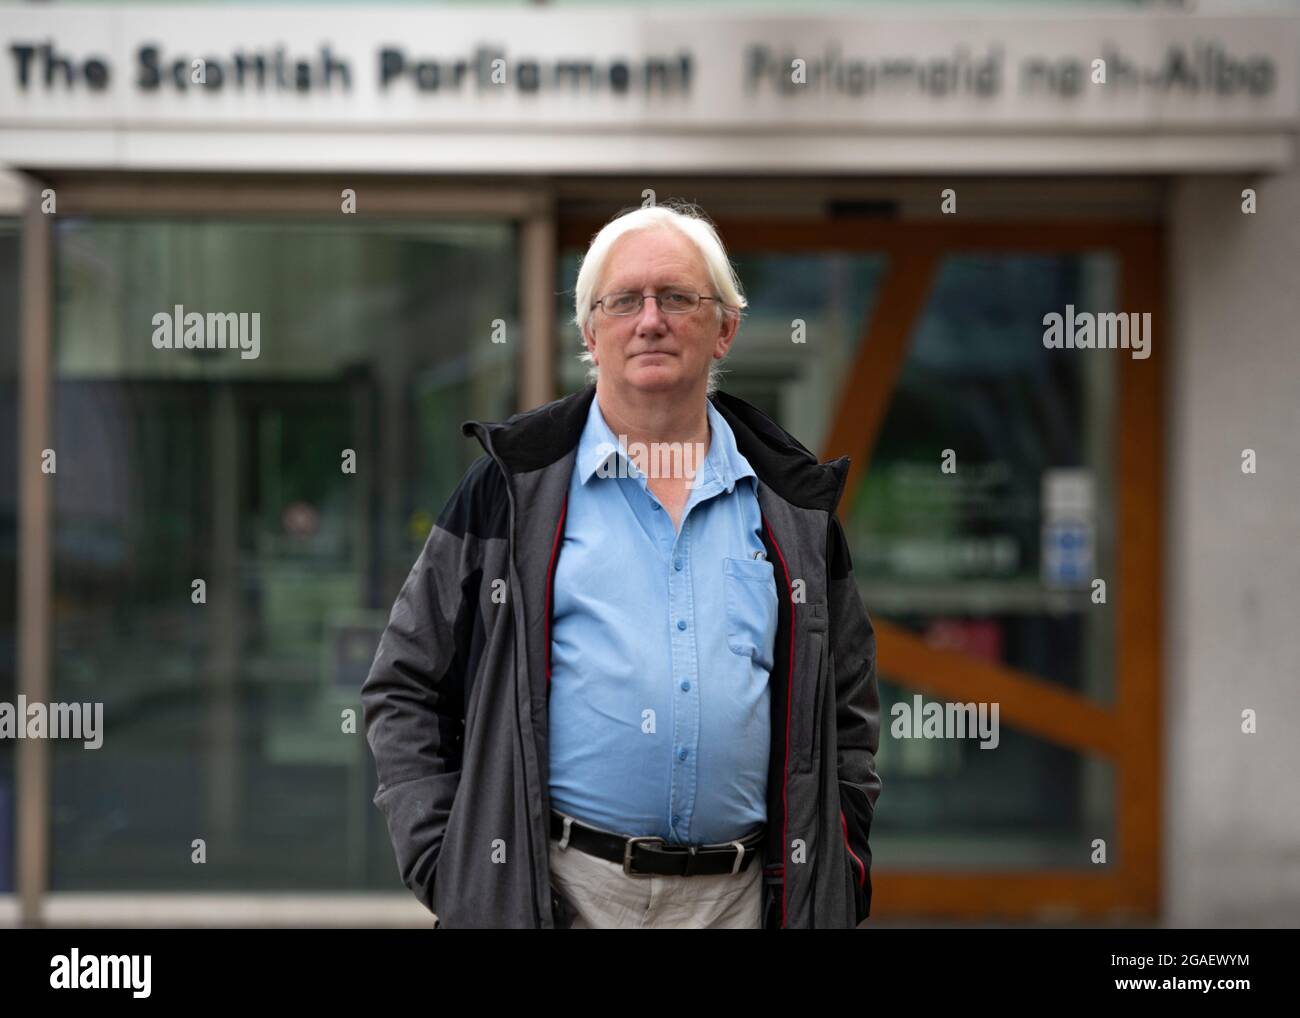 Edinburgh, Scotland, UK. 30th July, 2021. PICTURED: Craig Murray, is to be jailed for eight months after Lady Dorian ordered Craig Murray in contempt of court over jigsaw identification of a witness during the Alex Salmond trial last year. Mr Murray appealed this ruling without success. This Sunday at 11am he is to hand himself into his local police station in St Leonards, Edinburgh. Credit: Colin Fisher/Alamy Live News Stock Photo